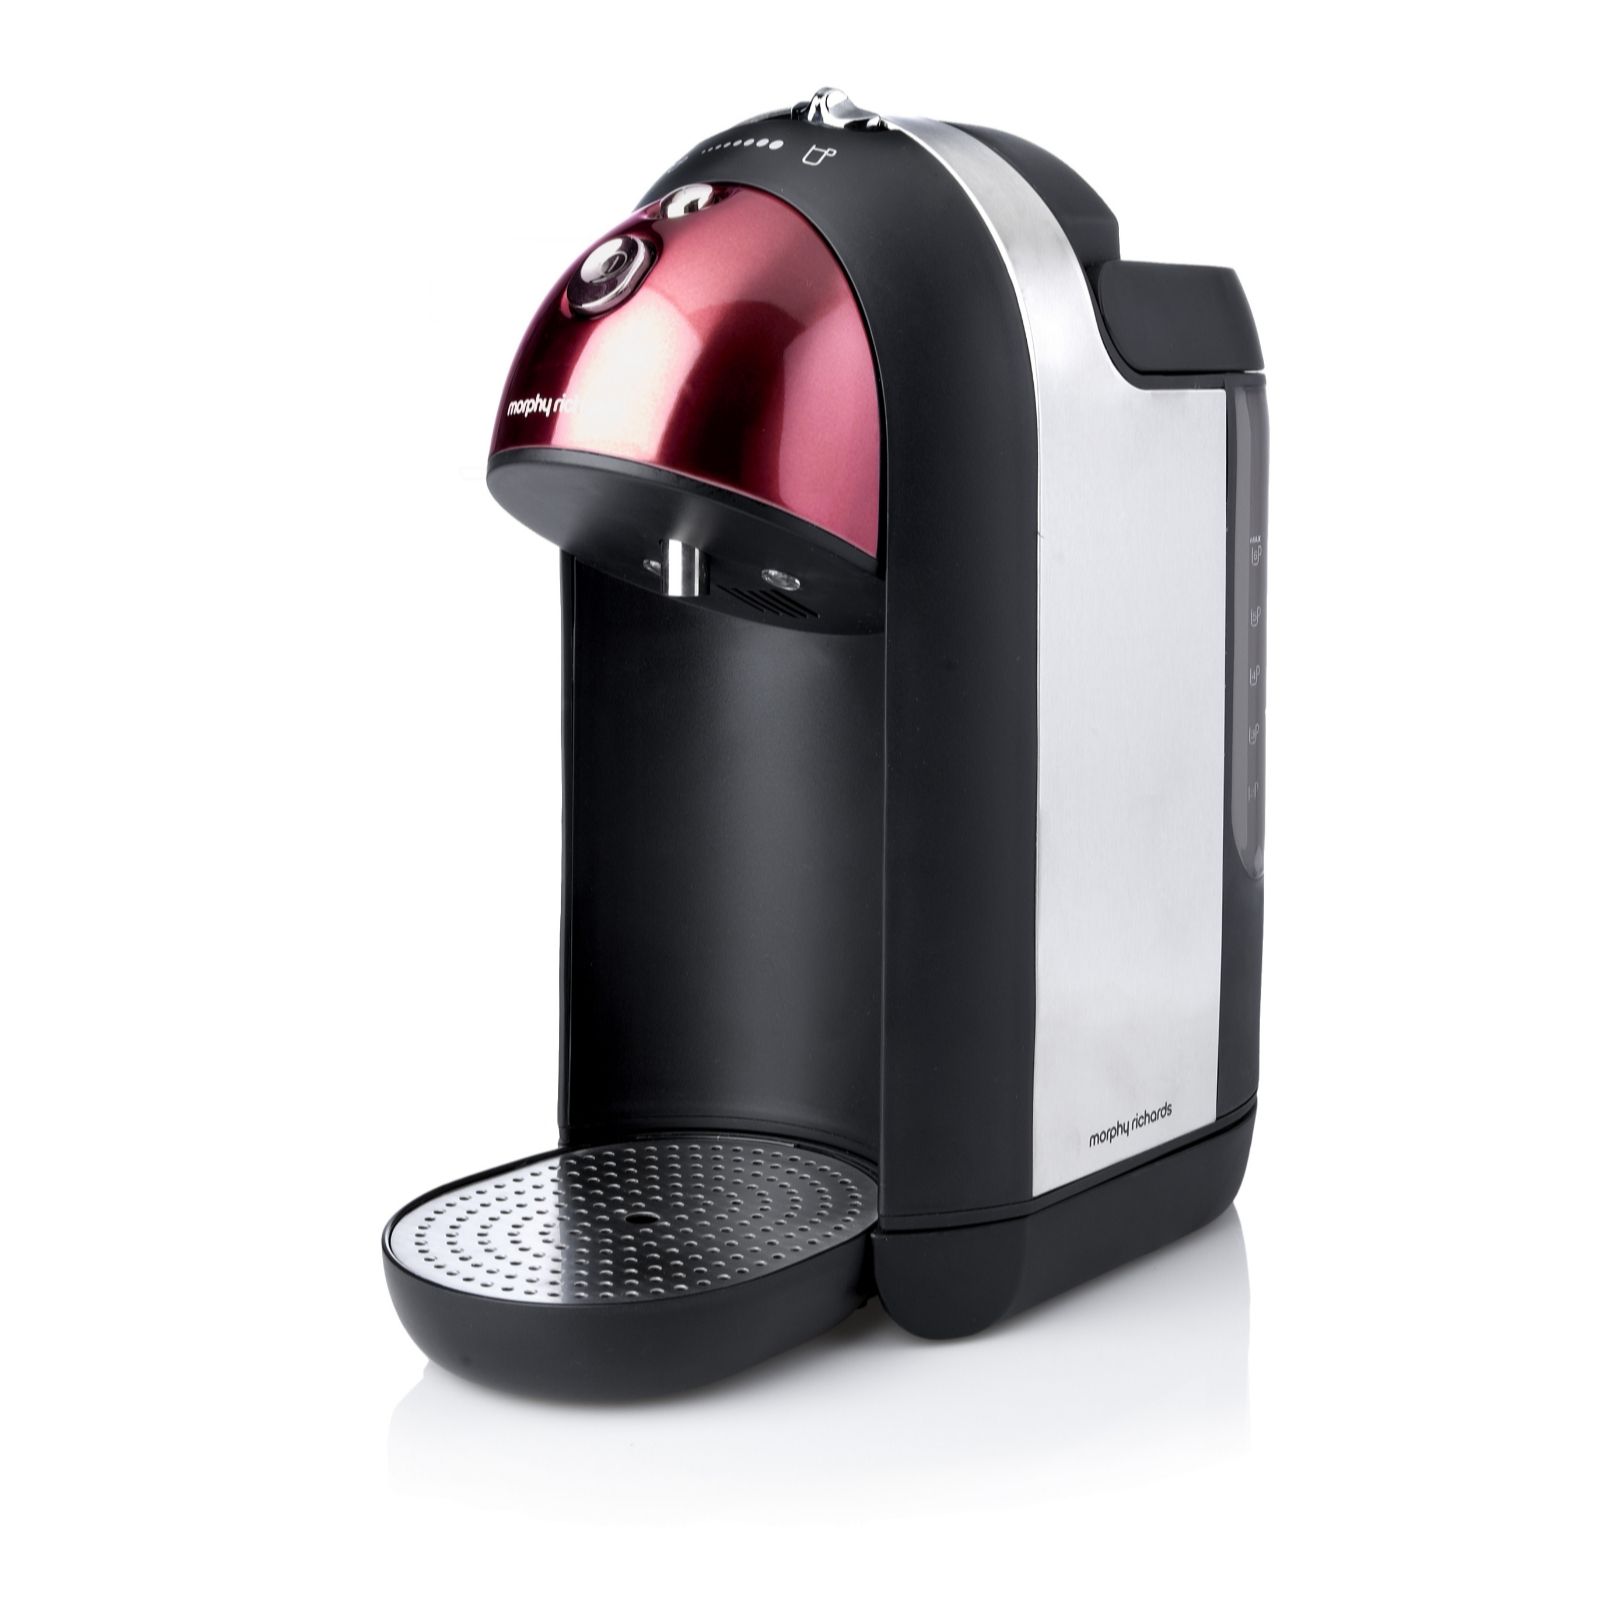 morphy richards kettle one cup